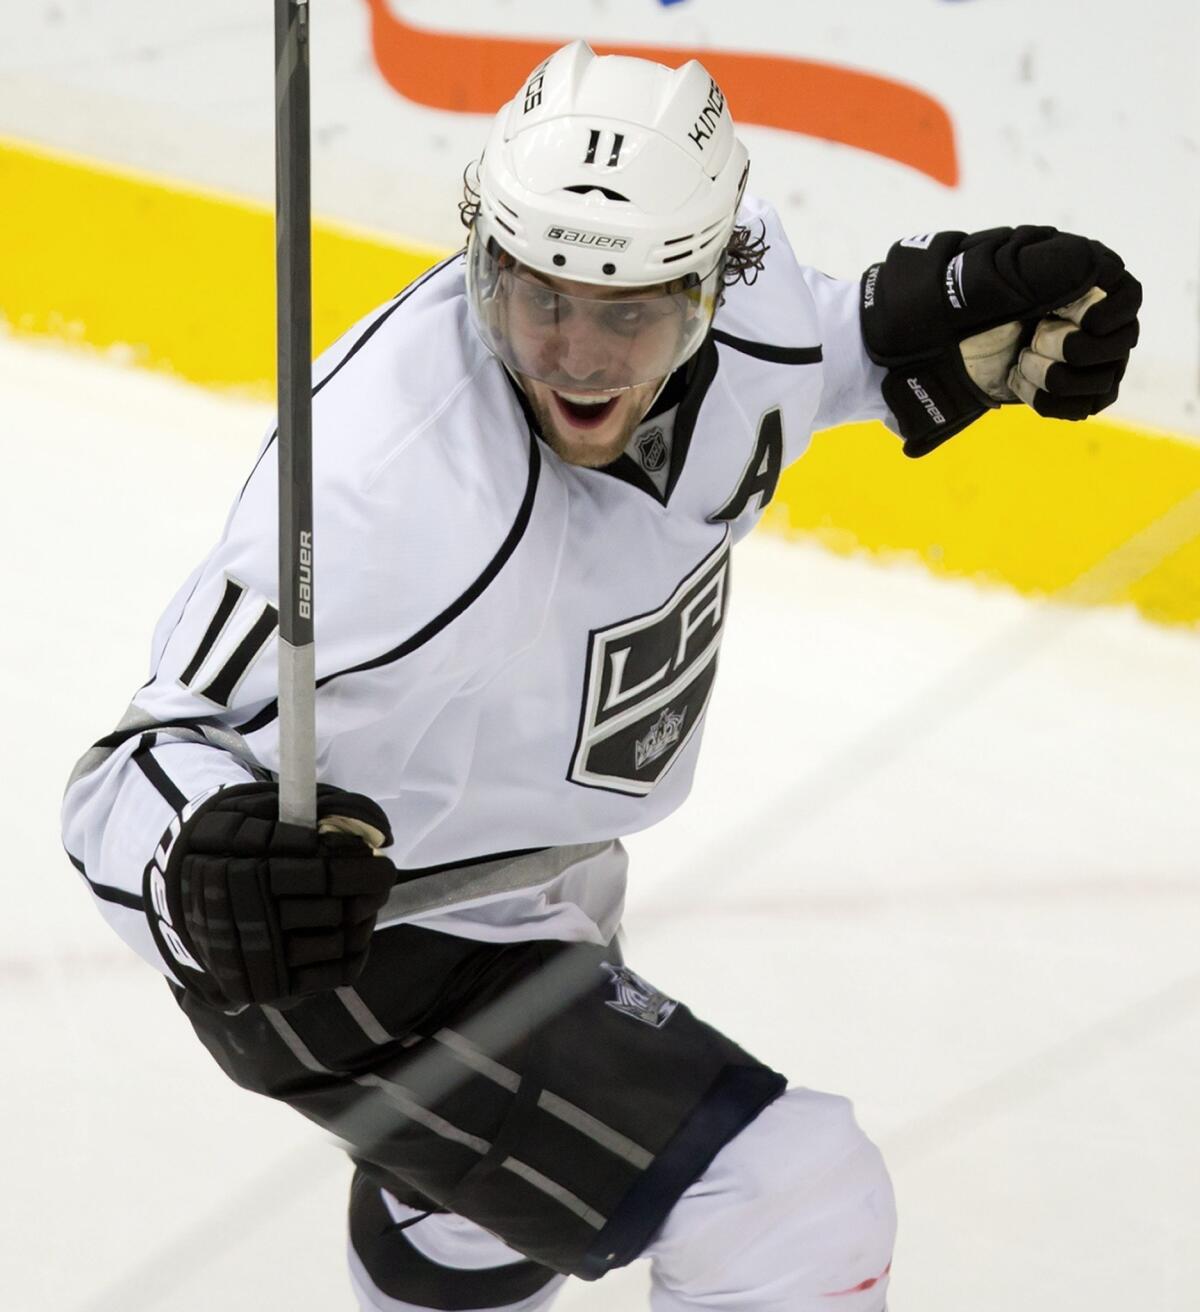 Center Anze Kopitar celebrates his winning goal during the Kings' 3-2 overtime victory over the Vancouver Canucks on Monday night.